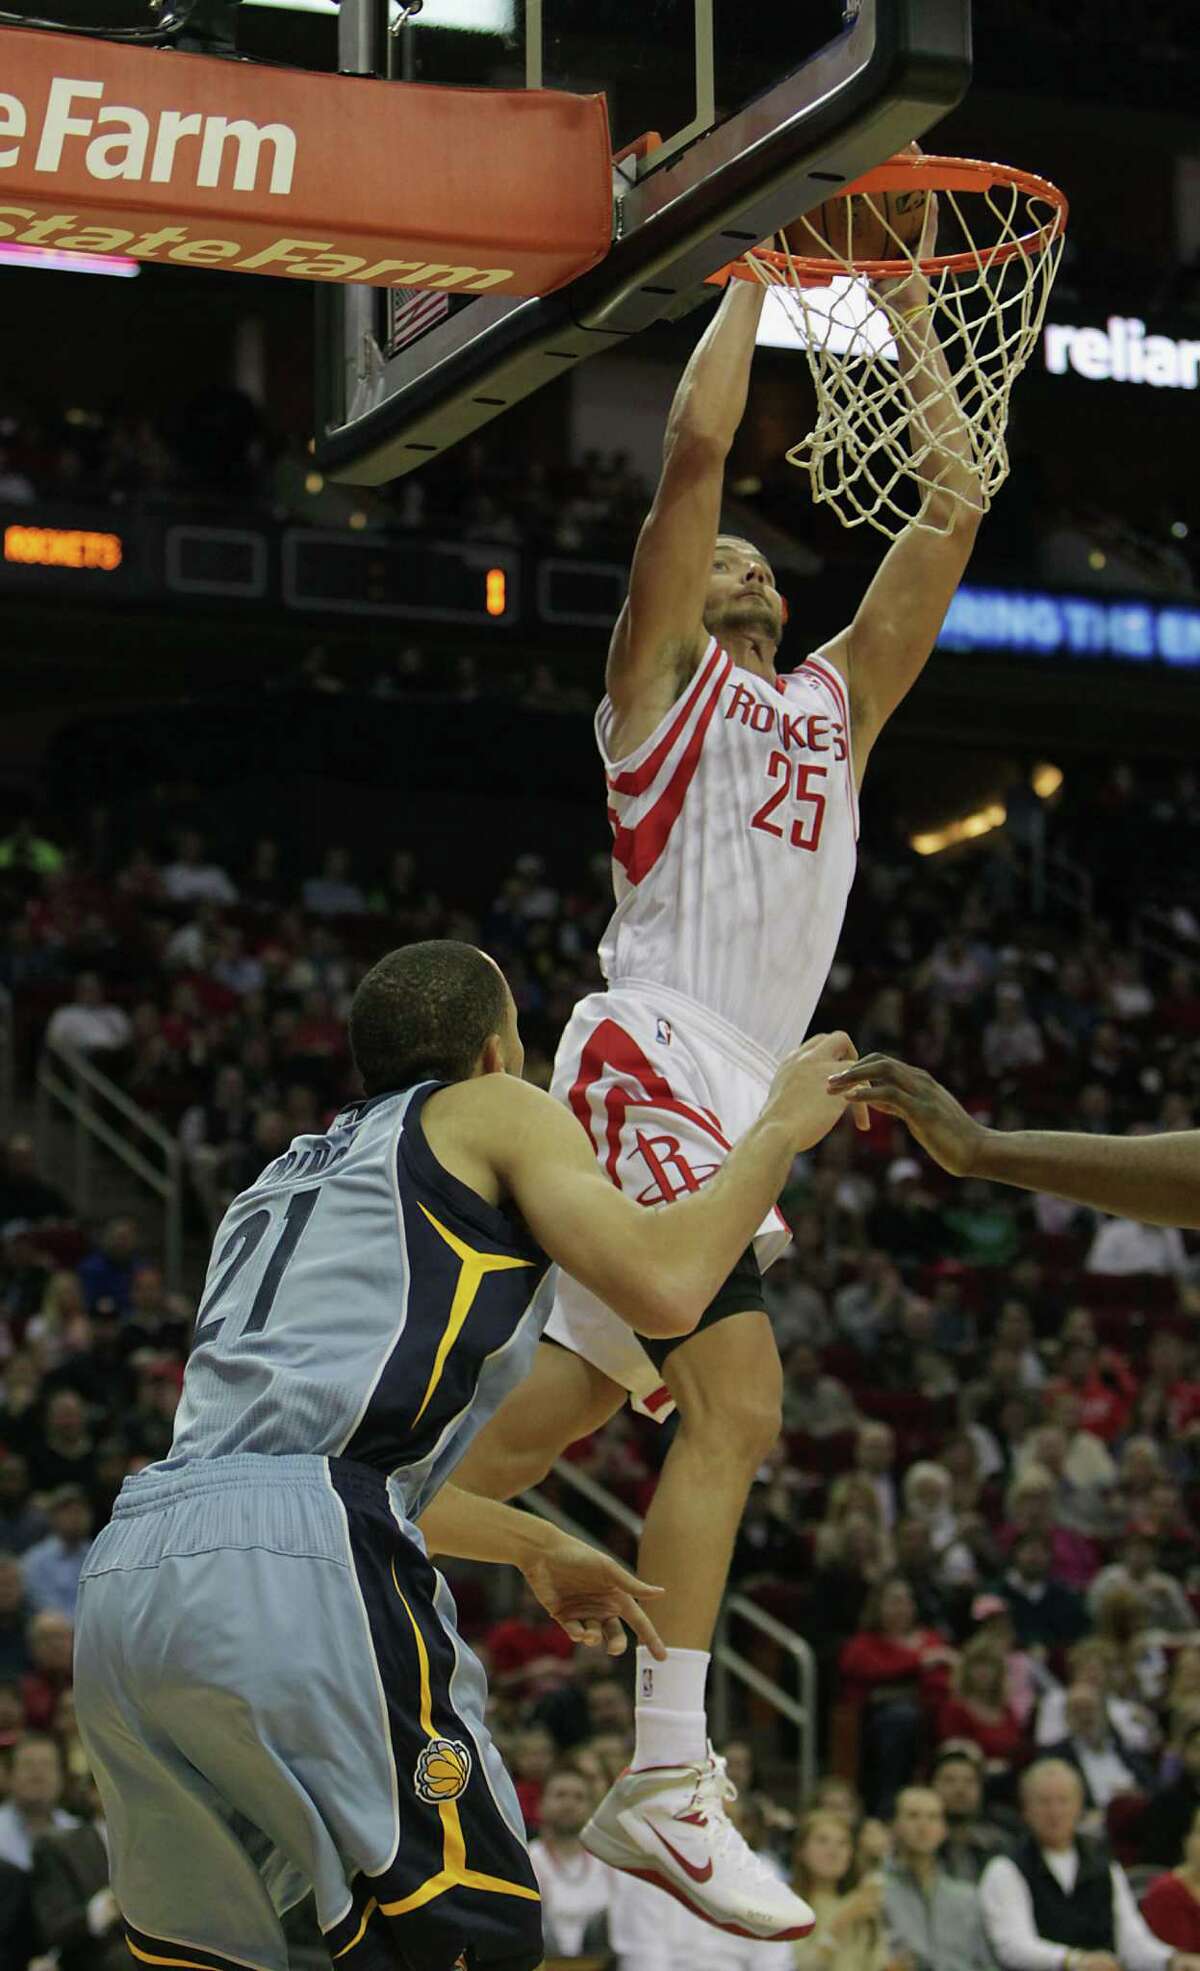 The Rockets' Chandler Parsons dunks over the Grizzlies' Tayshaun Prince on Thursday night.